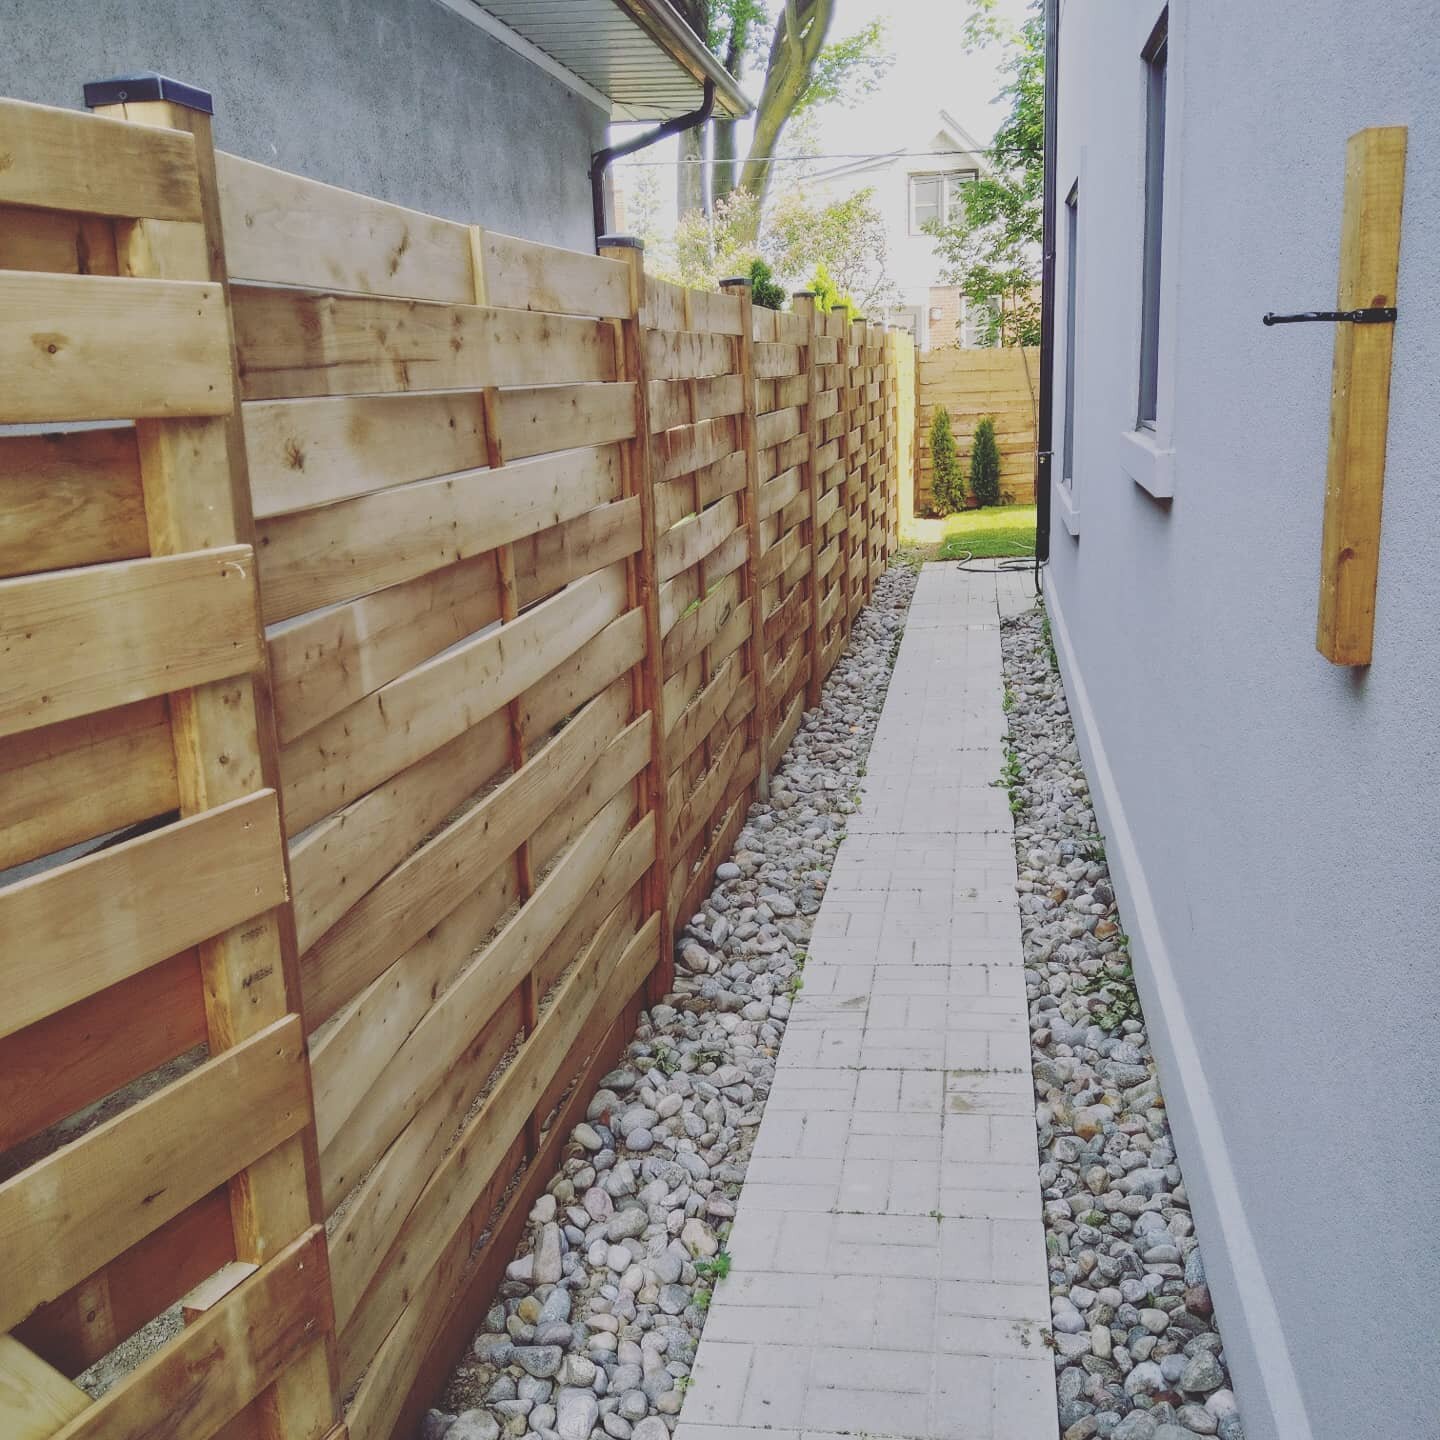 Check this out !👷Basket weave pressure treated fence #kingsgrovecontracting👊 
.
.
.
.
#fence #fencesofinstagram #fencedesign #fenceinstallation #fencebuilding #carpentry #carpenter #ontariocontractor #ontario #canada🇨🇦